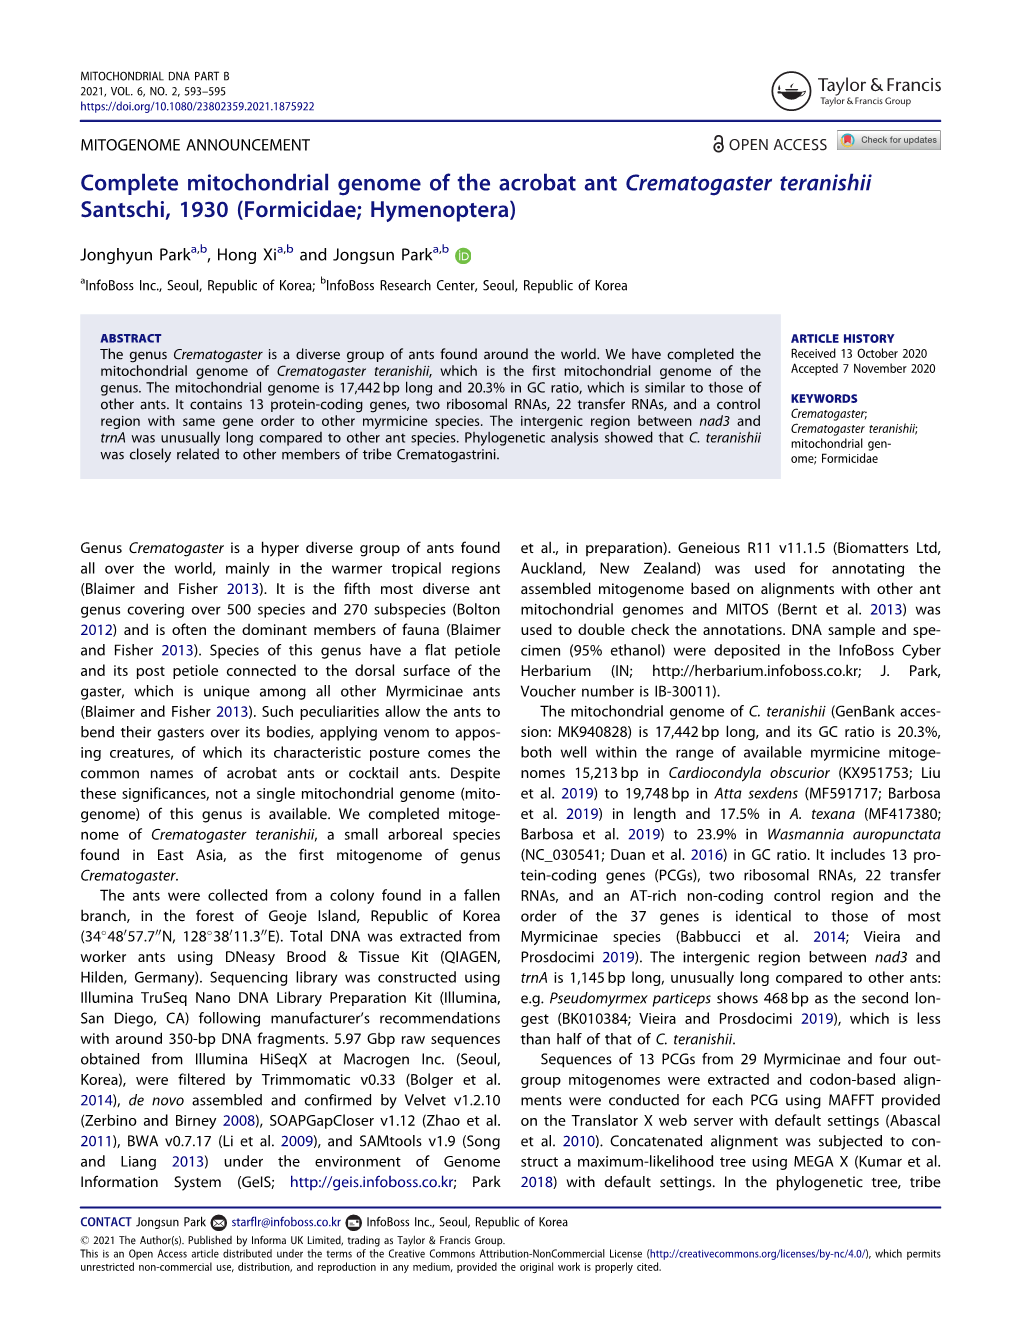 Complete Mitochondrial Genome of the Acrobat Ant Crematogaster Teranishii Santschi, 1930 (Formicidae; Hymenoptera)